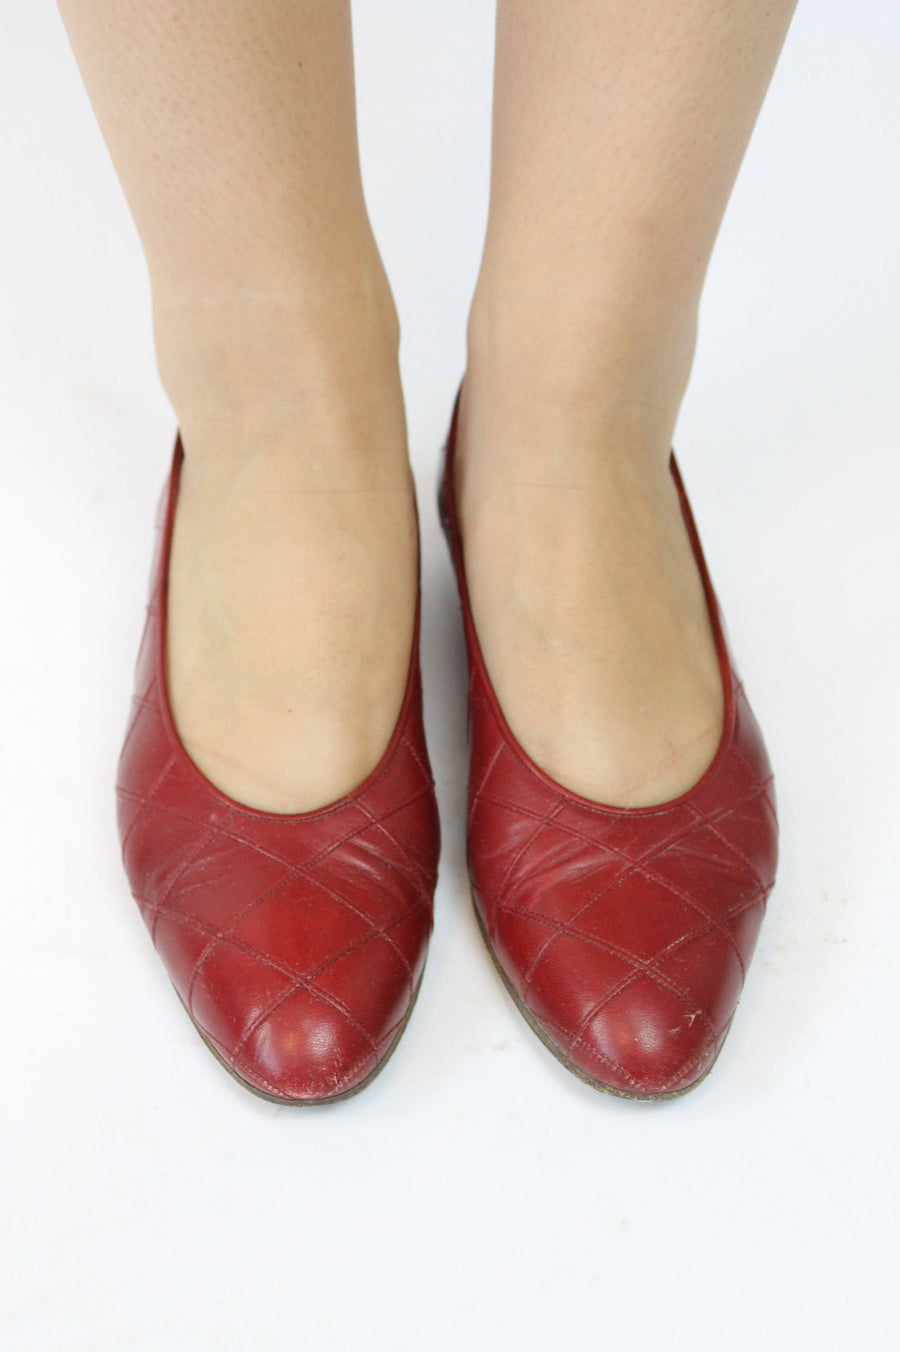 1980s Chanel quilted pumps size 7 us | vintage classic flats